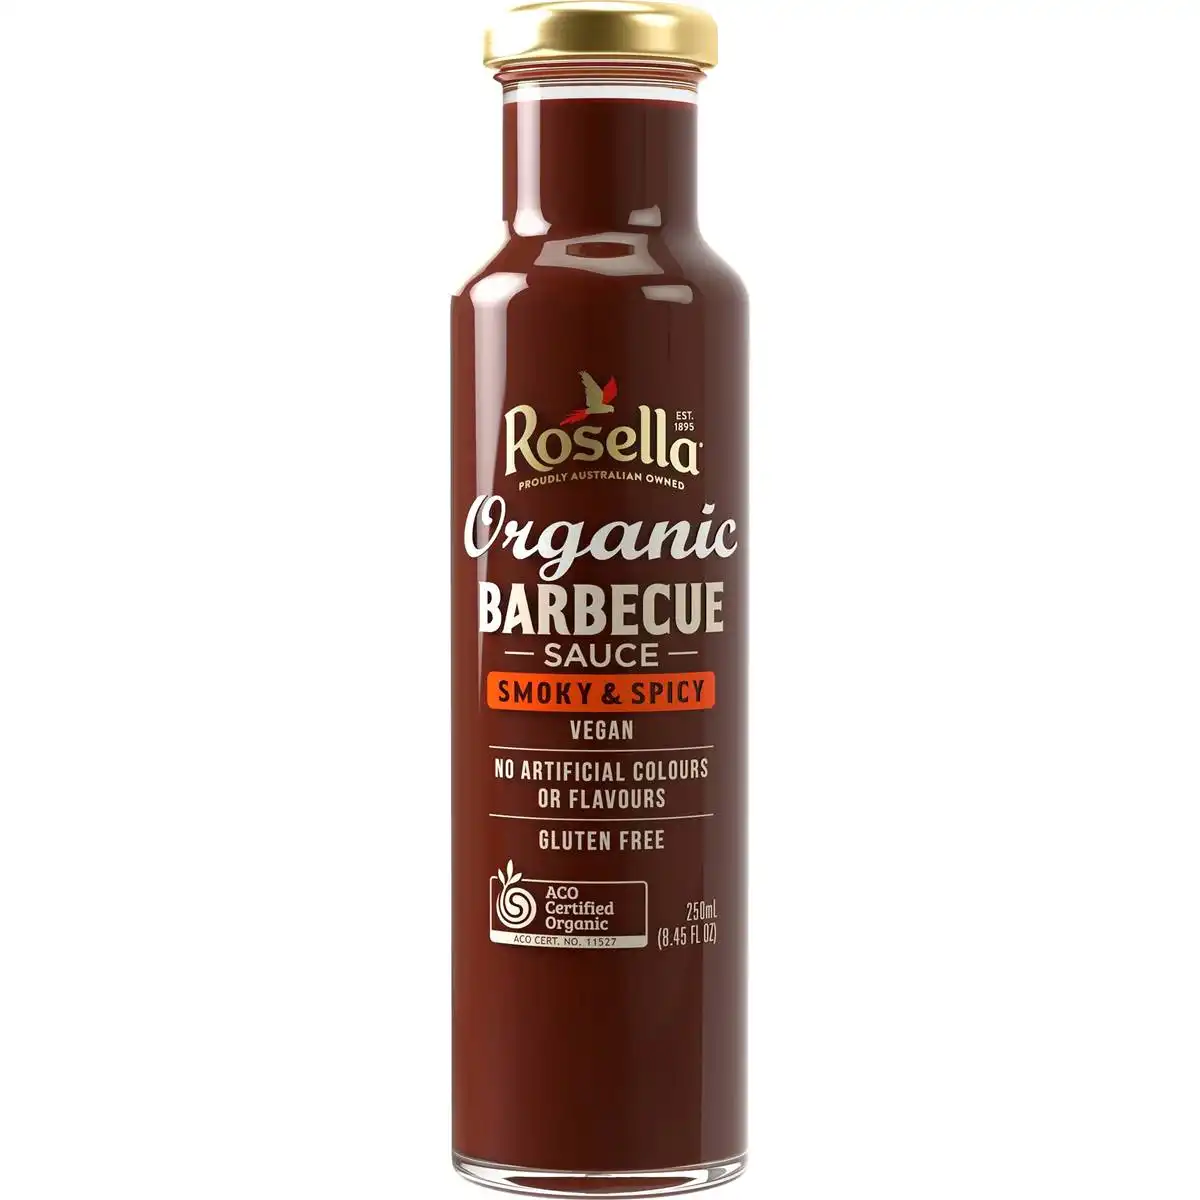 (1/2 price deal) Rosella Organic Smoky & Spicy BBQ Sauce | 250mL now $3.25(was $6.50)